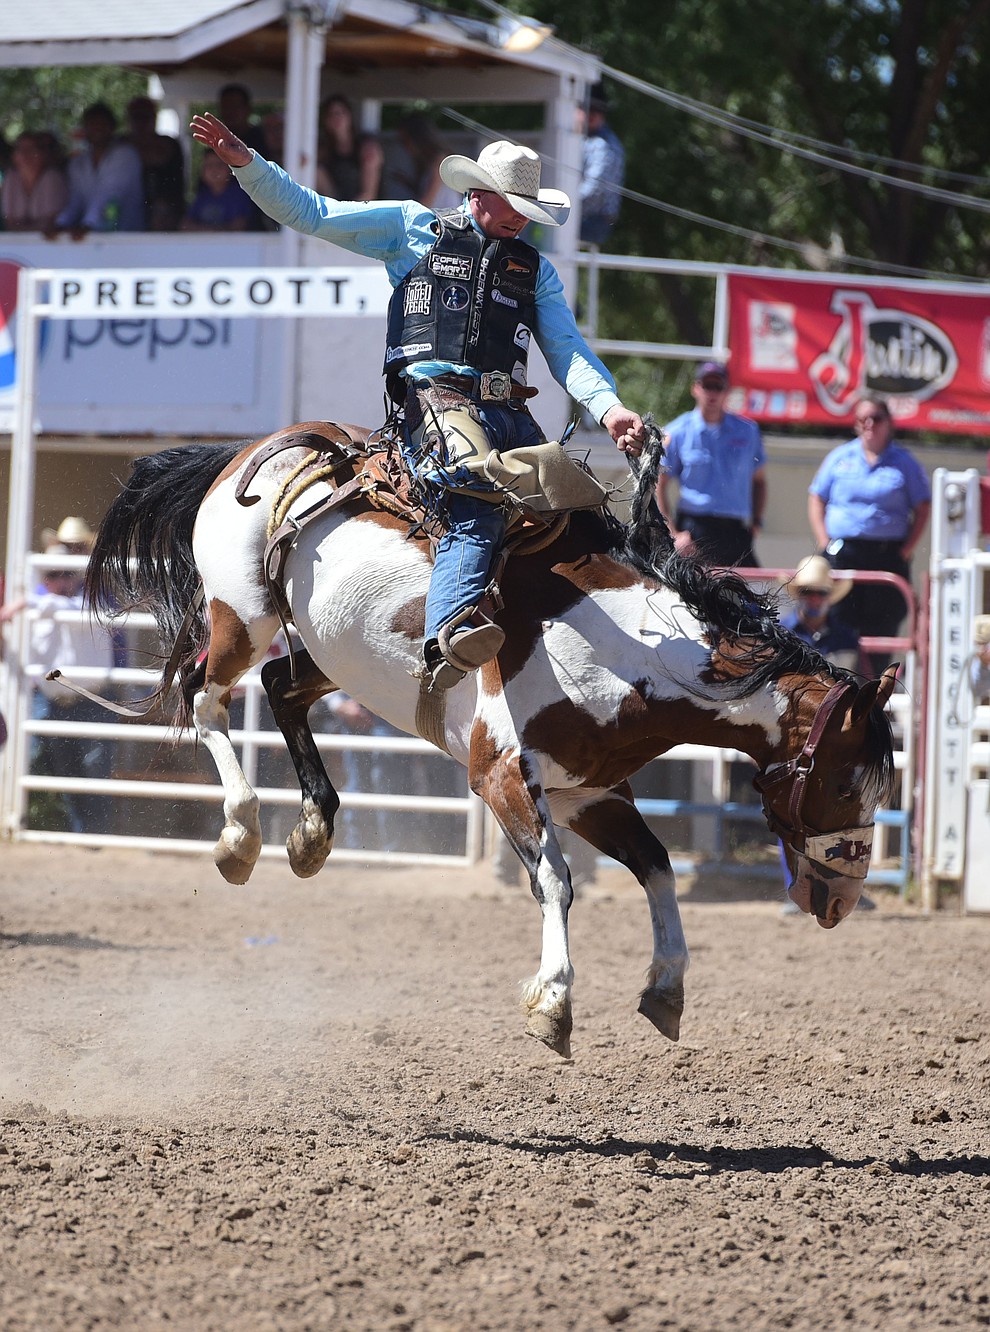 Taos Muncy rides War Wagon in the saddle bronc during the 8th and final performance of the Prescott Frontier Days Rodeo Tuesday, July 4 at the Prescott Rodeo Grounds.  (Les Stukenberg/Courier)